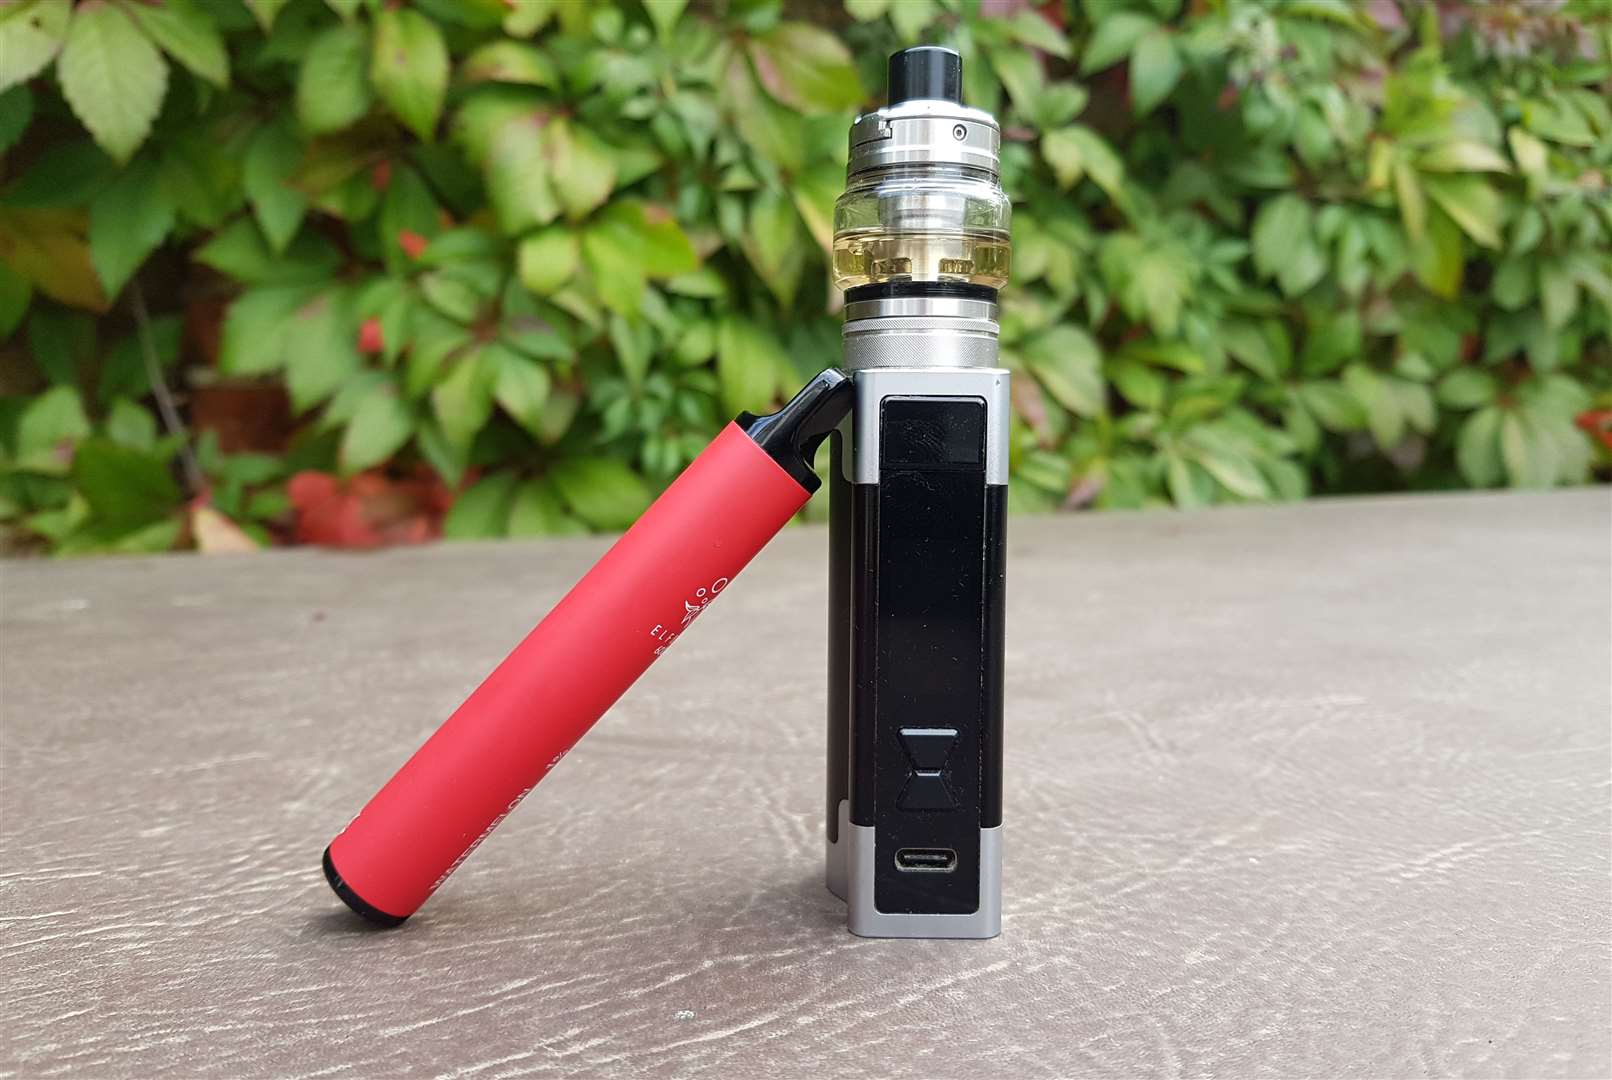 The traditional tank vape device - with the new breed of disposable leaning against it. Image: Stock photo.